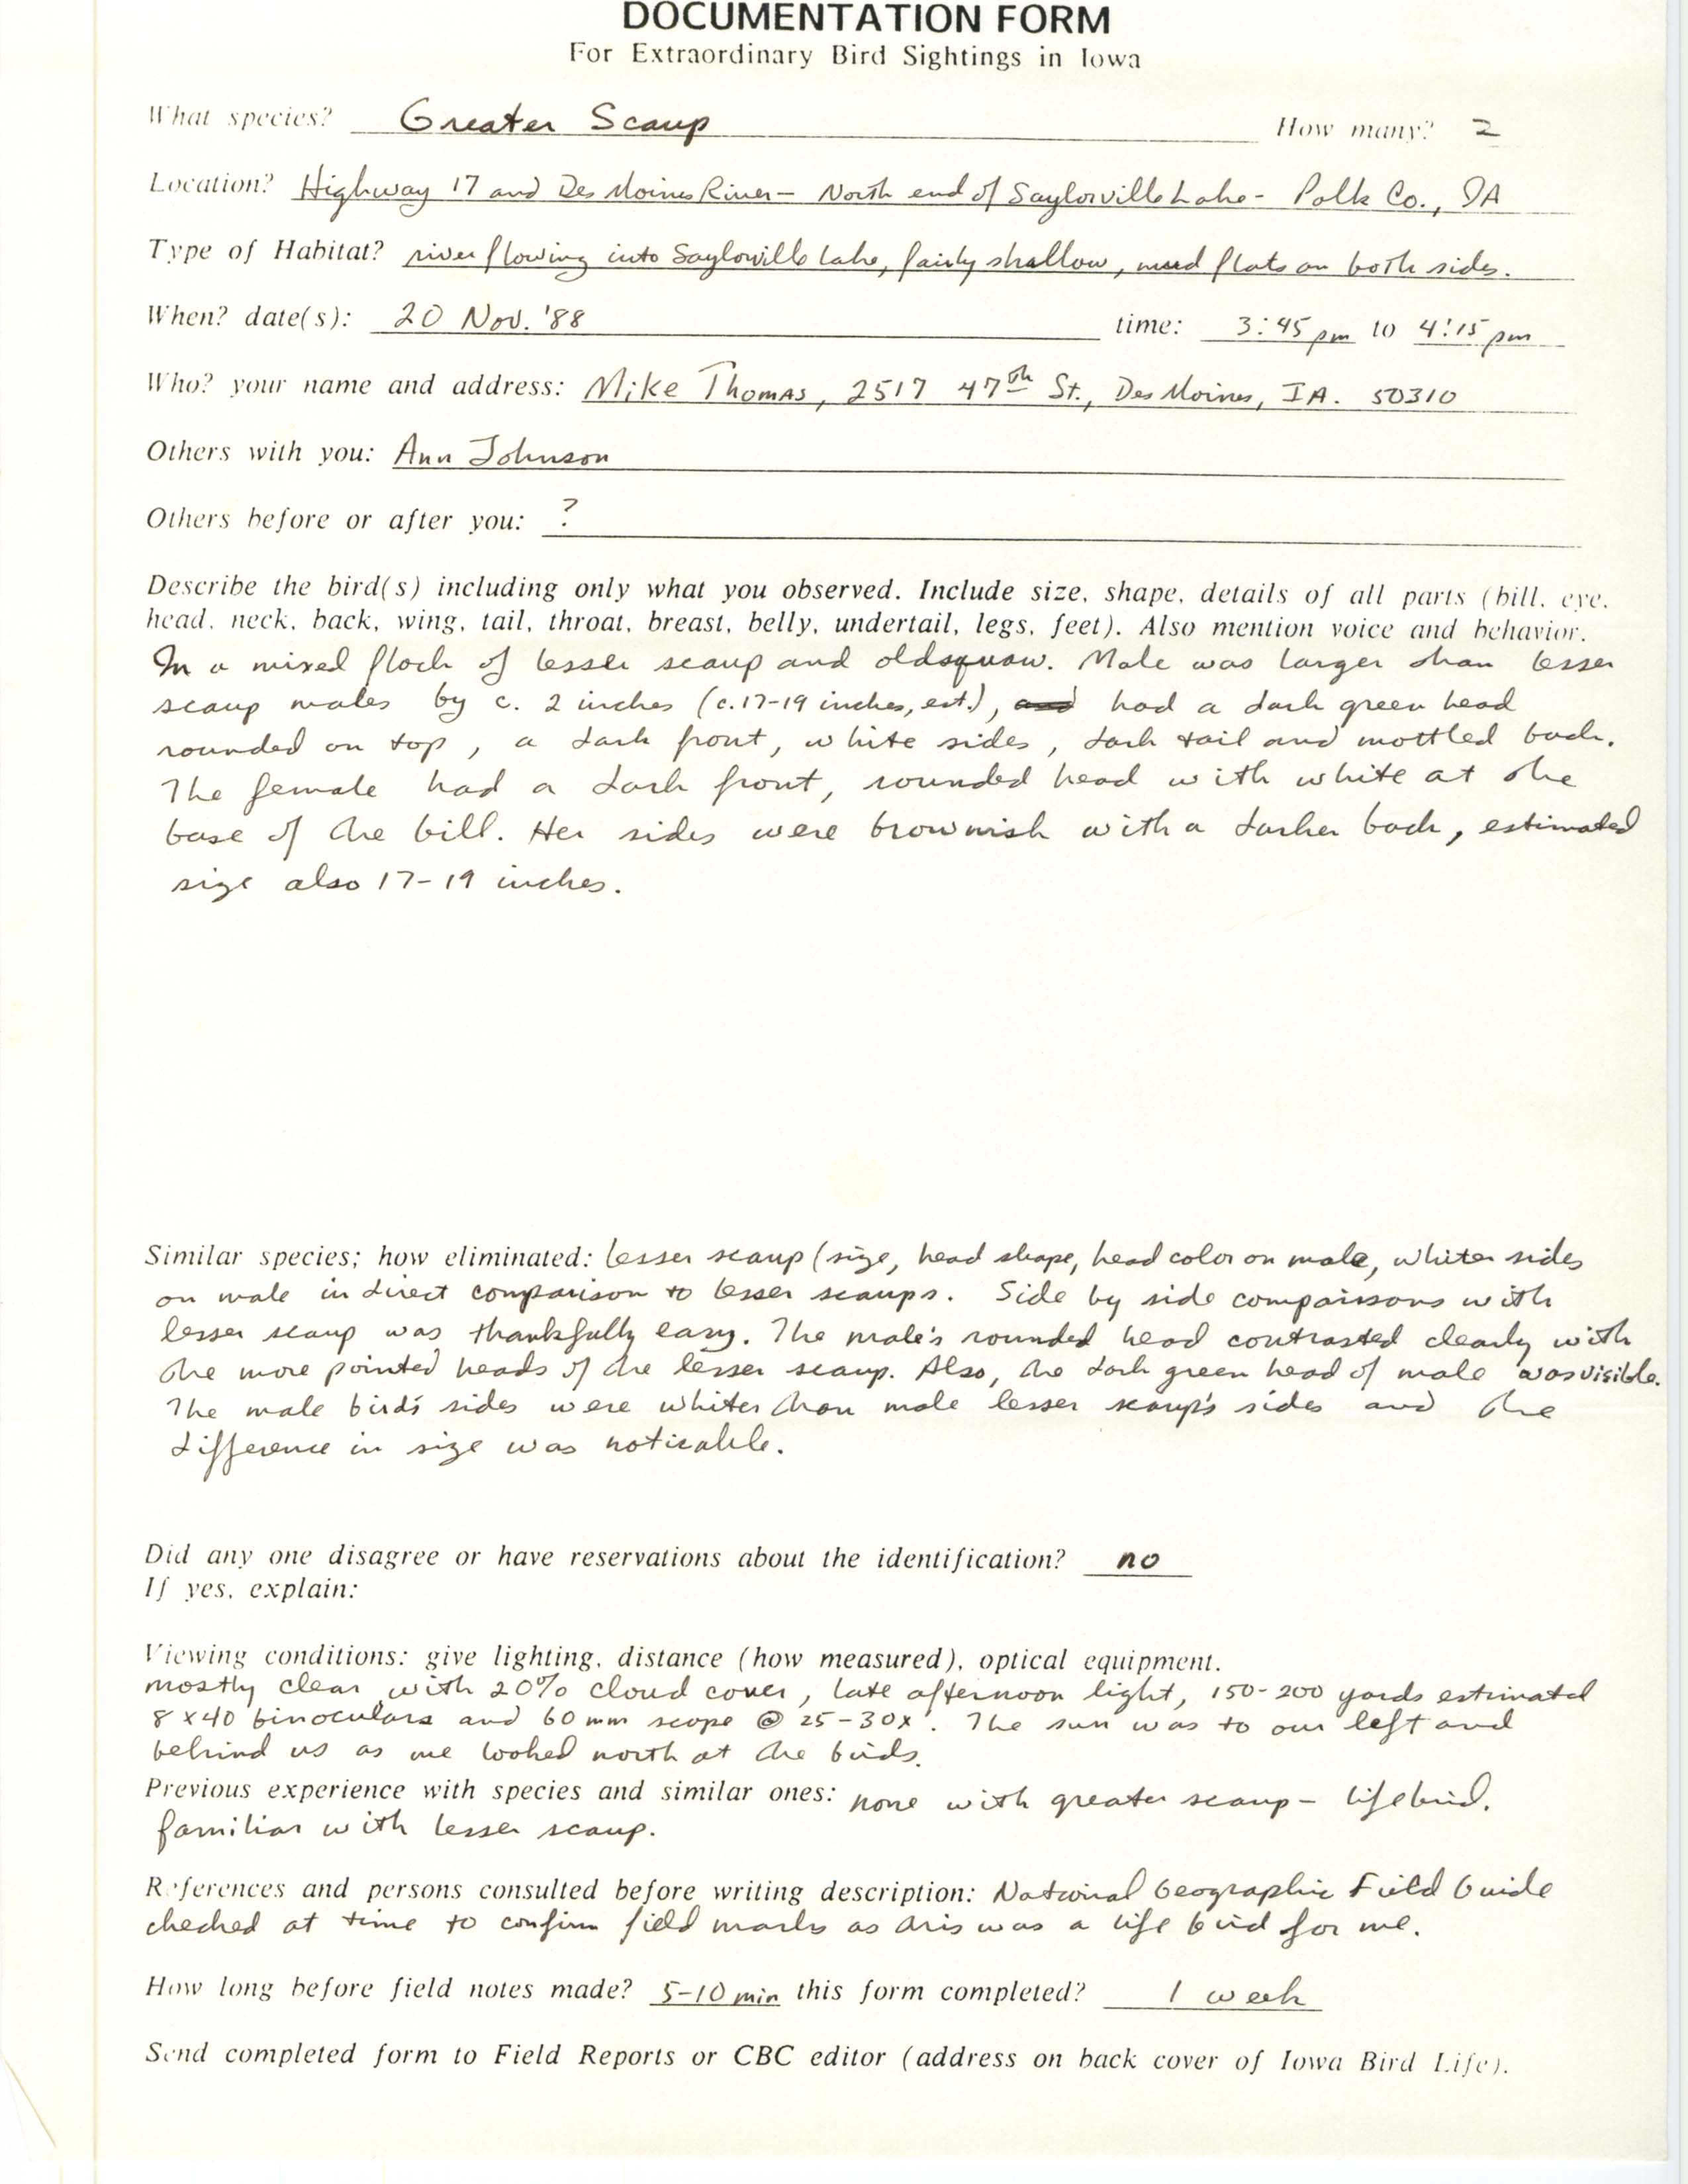 Rare bird documentation form for Greater Scaup at Saylorville Lake, 1988